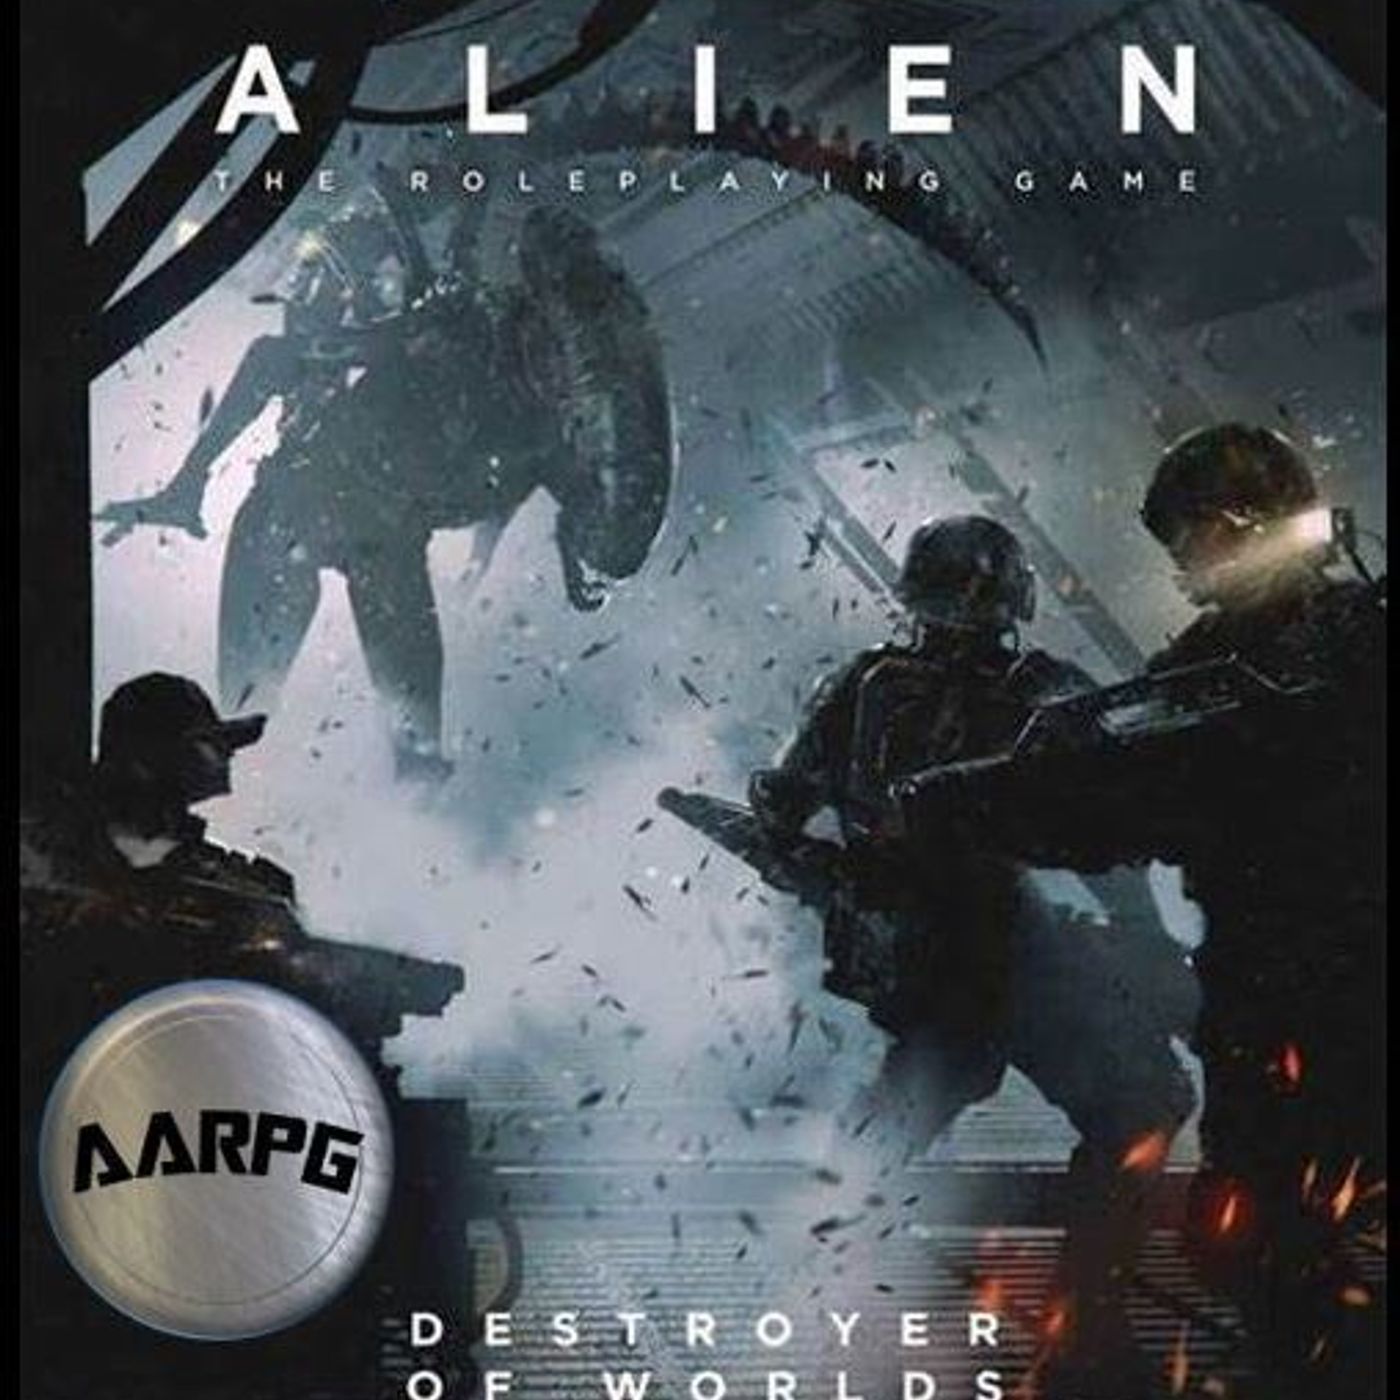 2: Alien RPG - Destroyer of Worlds - Episode 02 -”I Need Some Relief”